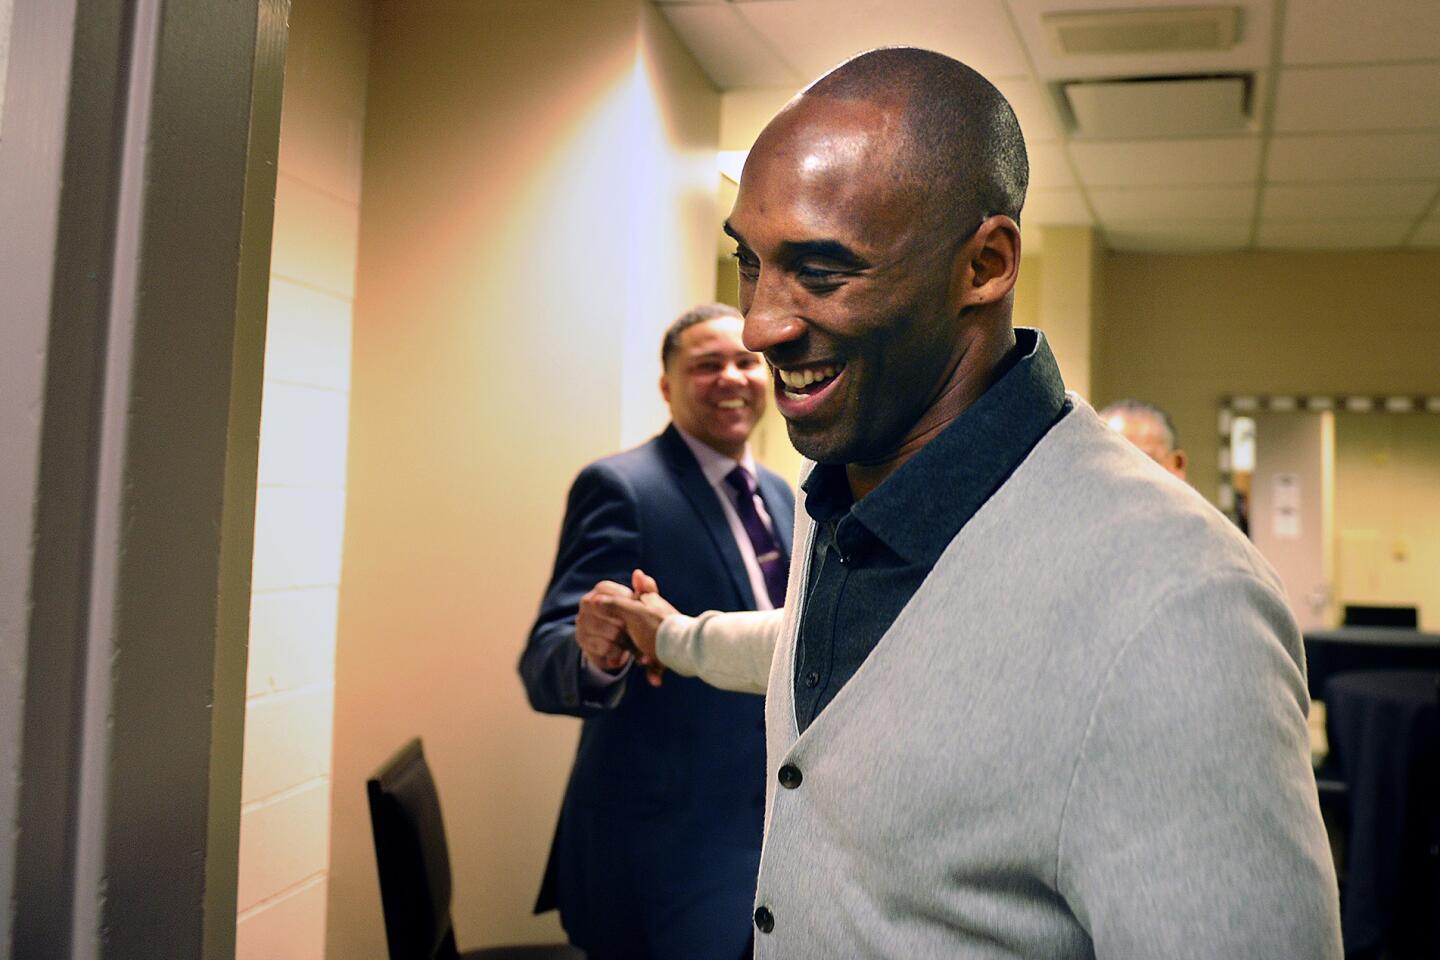 Kobe Bryant greets friends before the Lakers' game against the Pelicans in New Orleans.